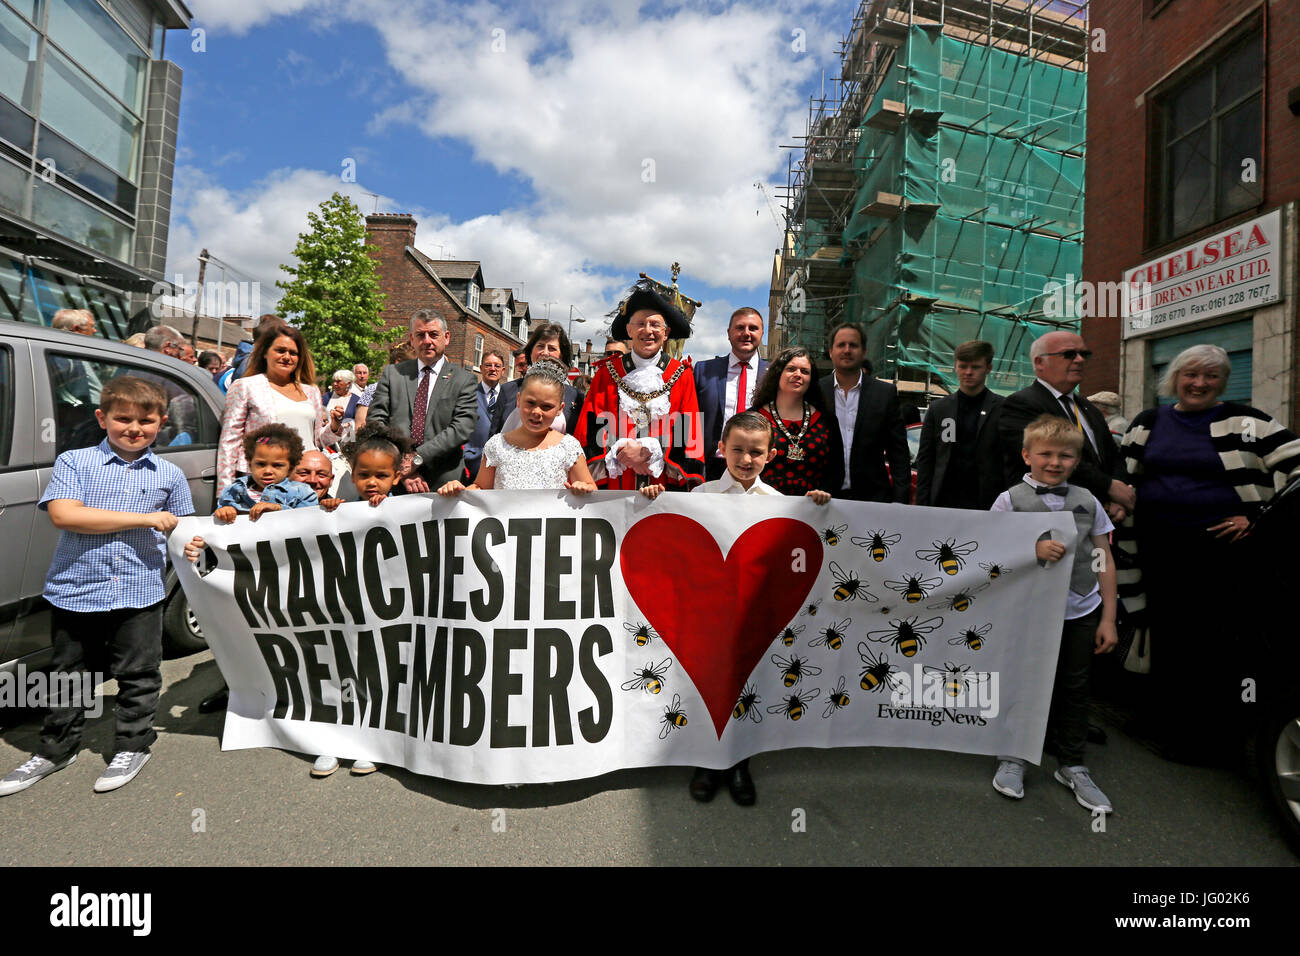 Manchester, UK. 2nd July, 2017. . The Italian Madonna del Rosario procession prepares to leave Ancoats led by The Lord Mayor and Children with a banner which reads "Manchester Remembers",  Manchester,2nd July, 2017  Credit: Barbara Cook/Alamy Live News Stock Photo